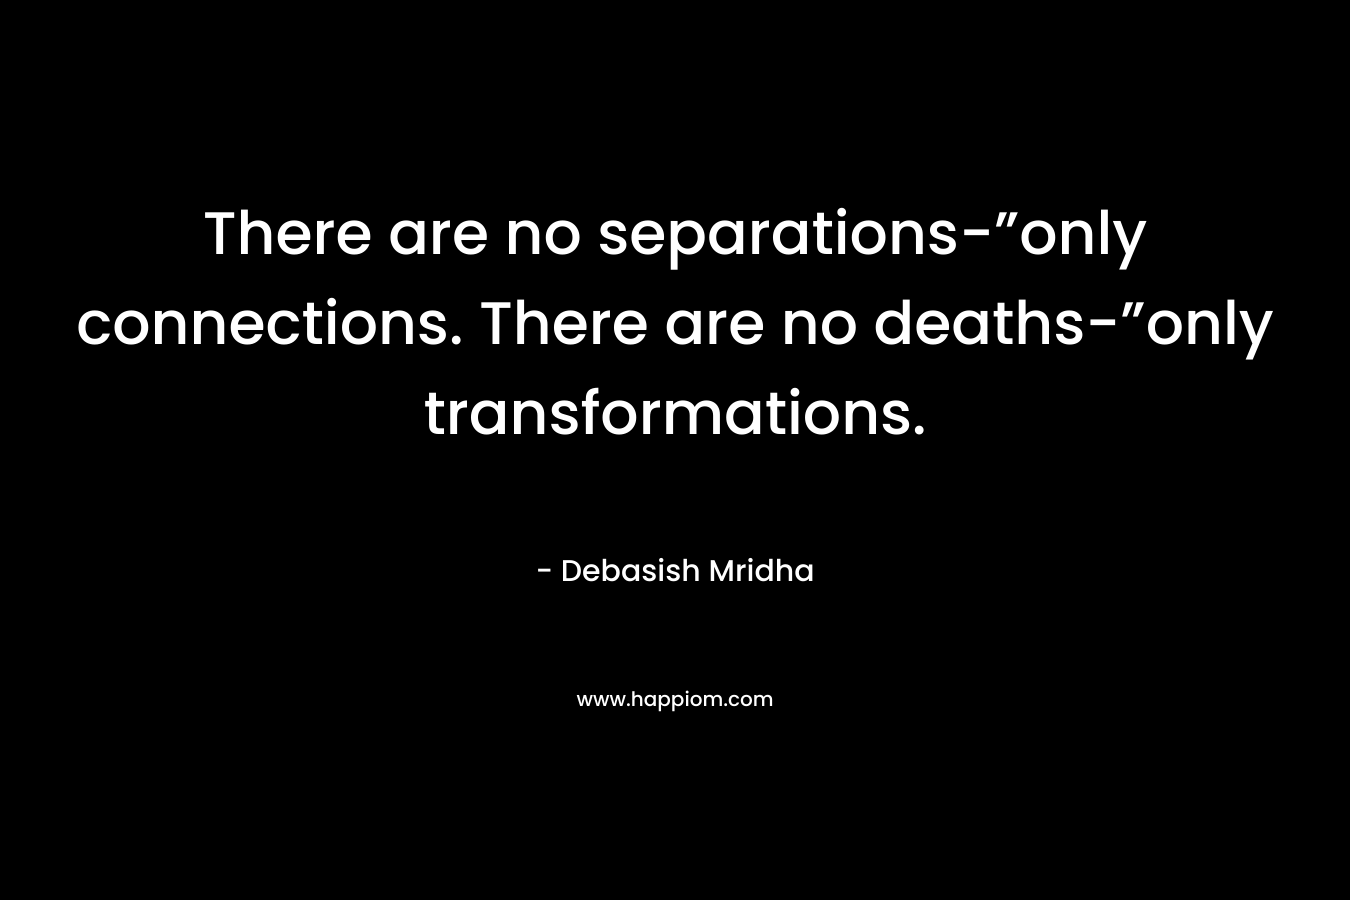 There are no separations-”only connections. There are no deaths-”only transformations.